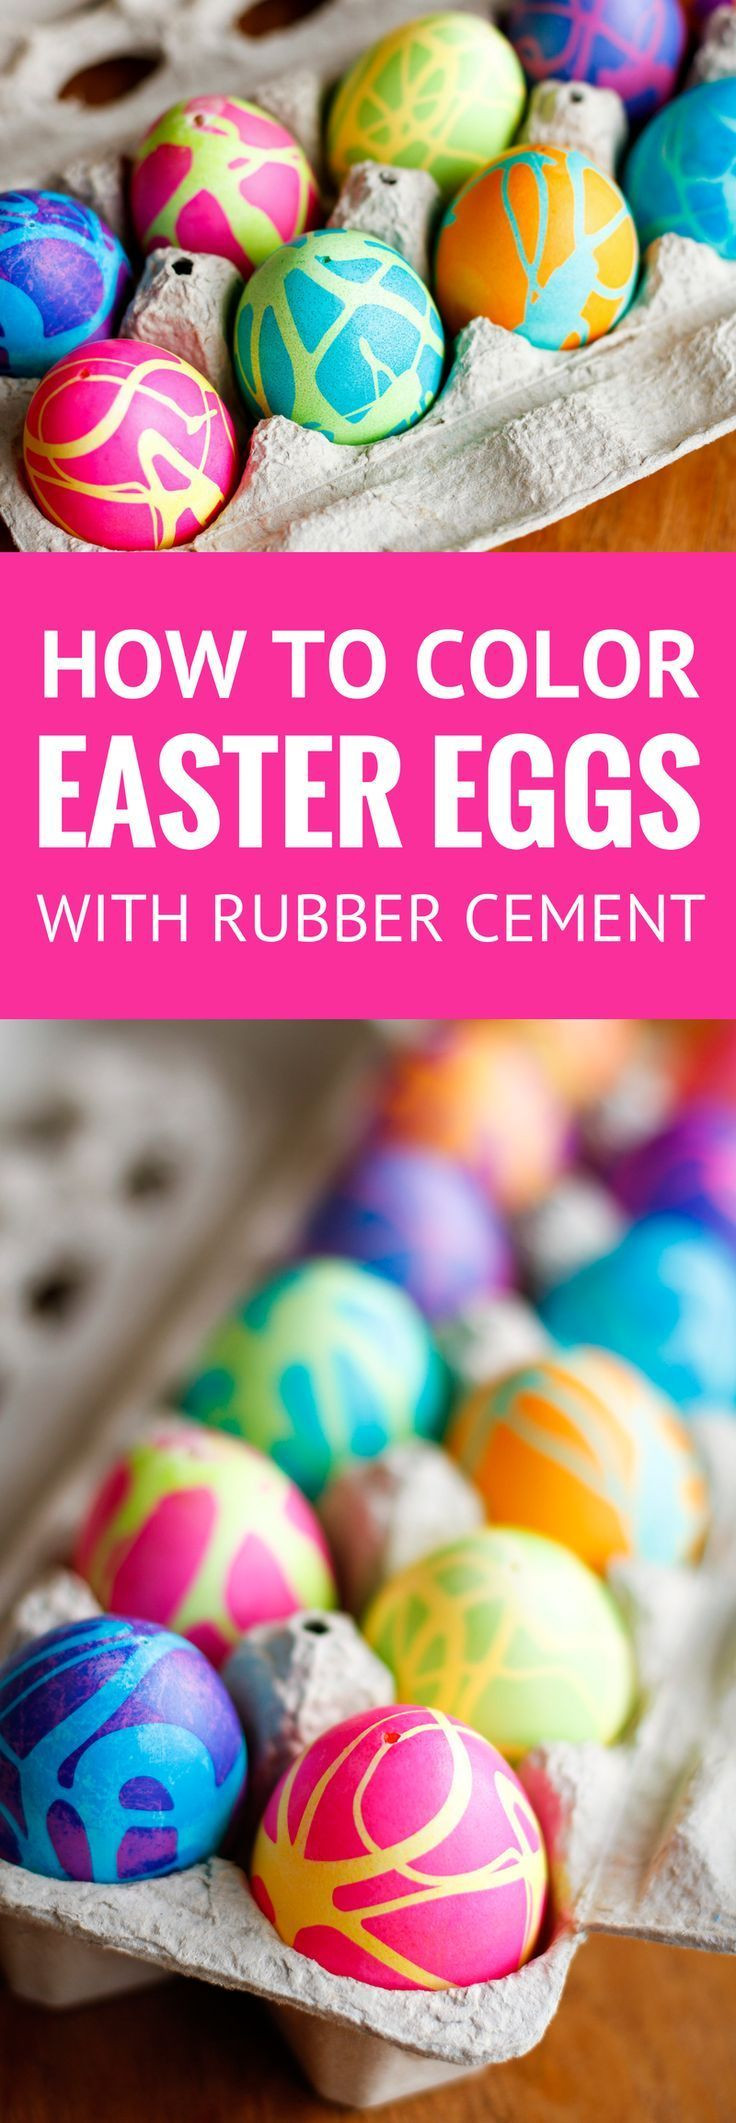 Coloring Easter Eggs With Food Coloring
 Coloring Easter Eggs w Rubber Cement dyeing Easter